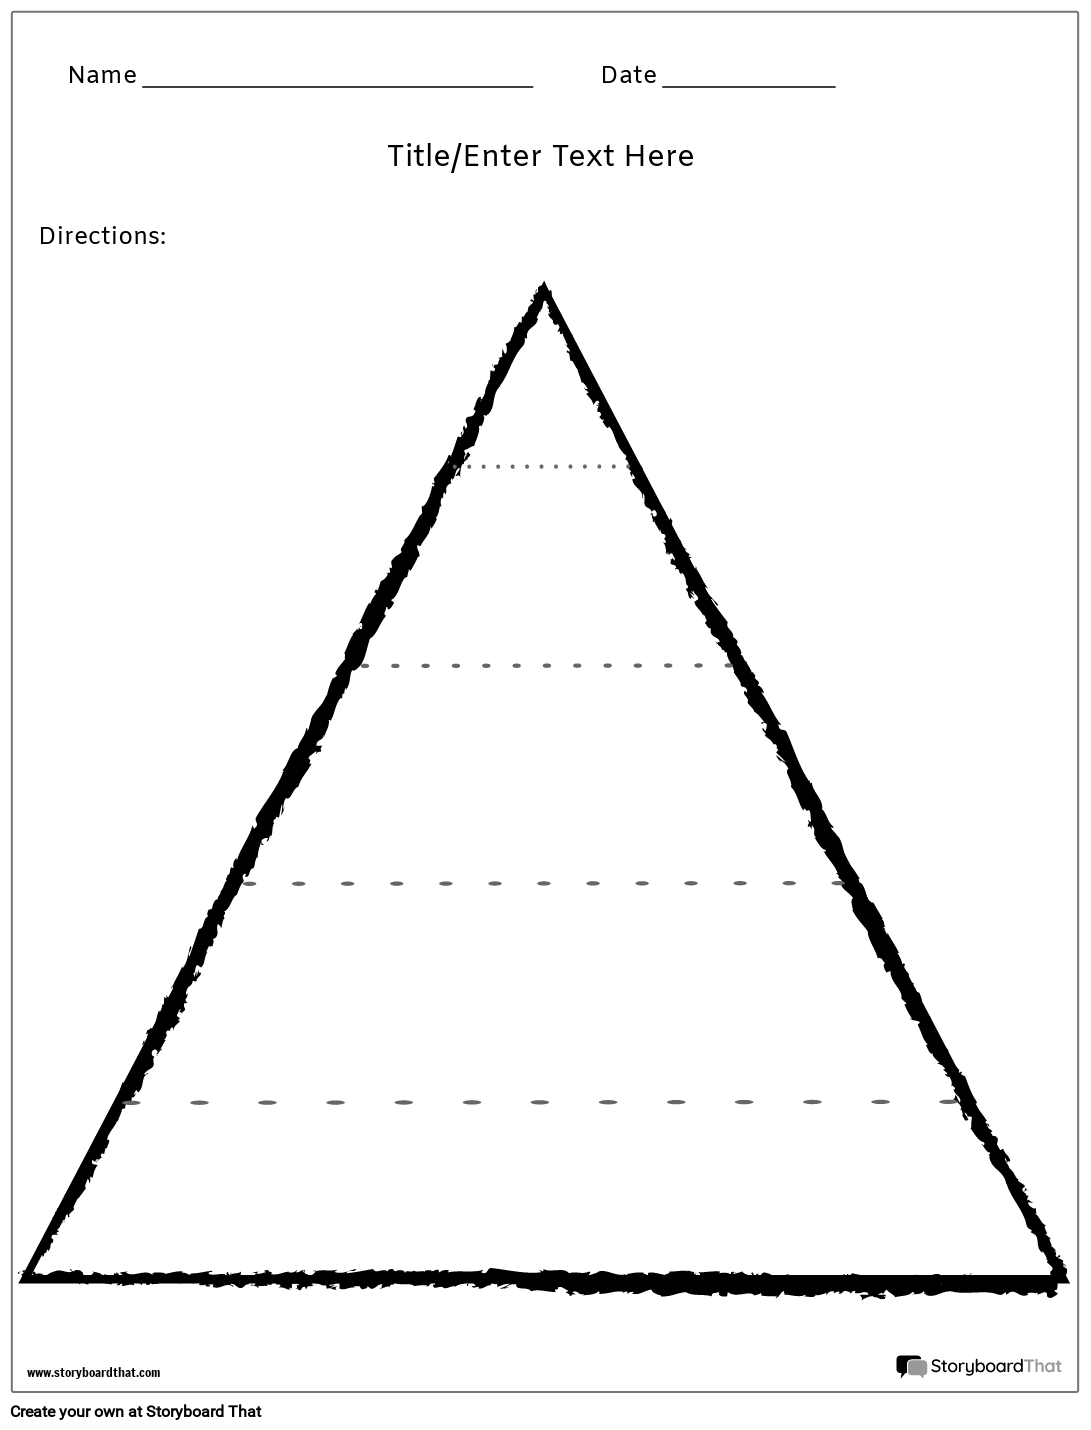 Simple Triangle Graphic Layout Template